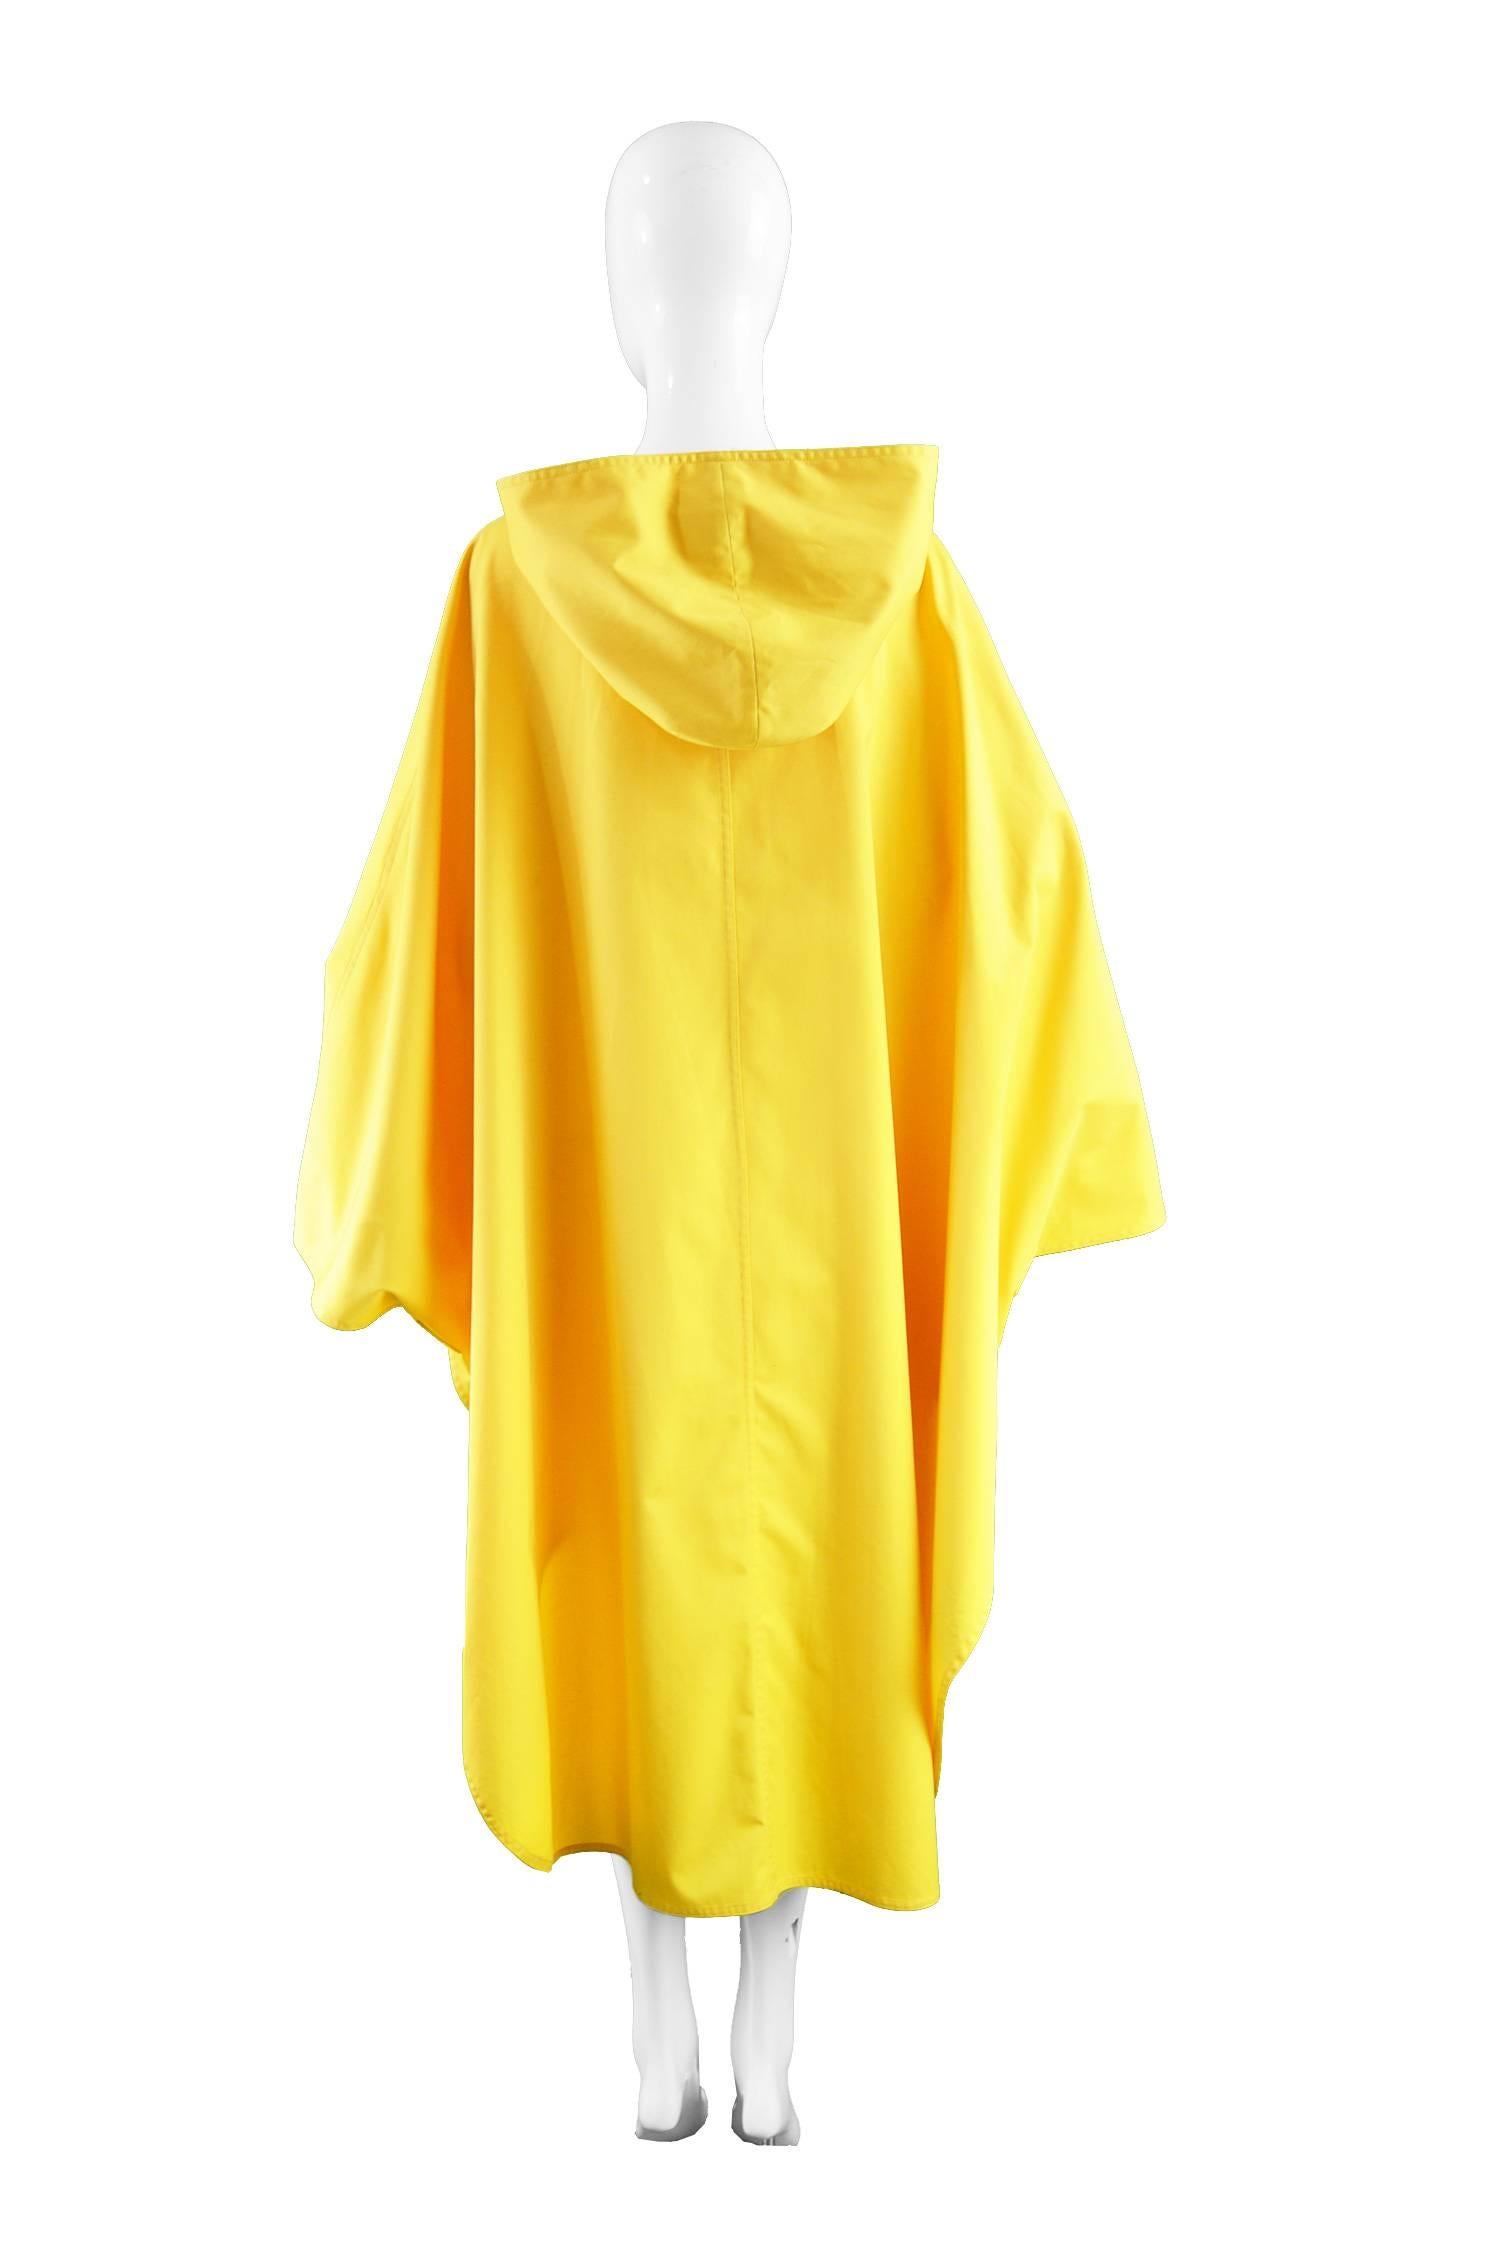 Aquascutum Vintage Mustard Yellow Hooded Trench Cape Coat, 1980s  2